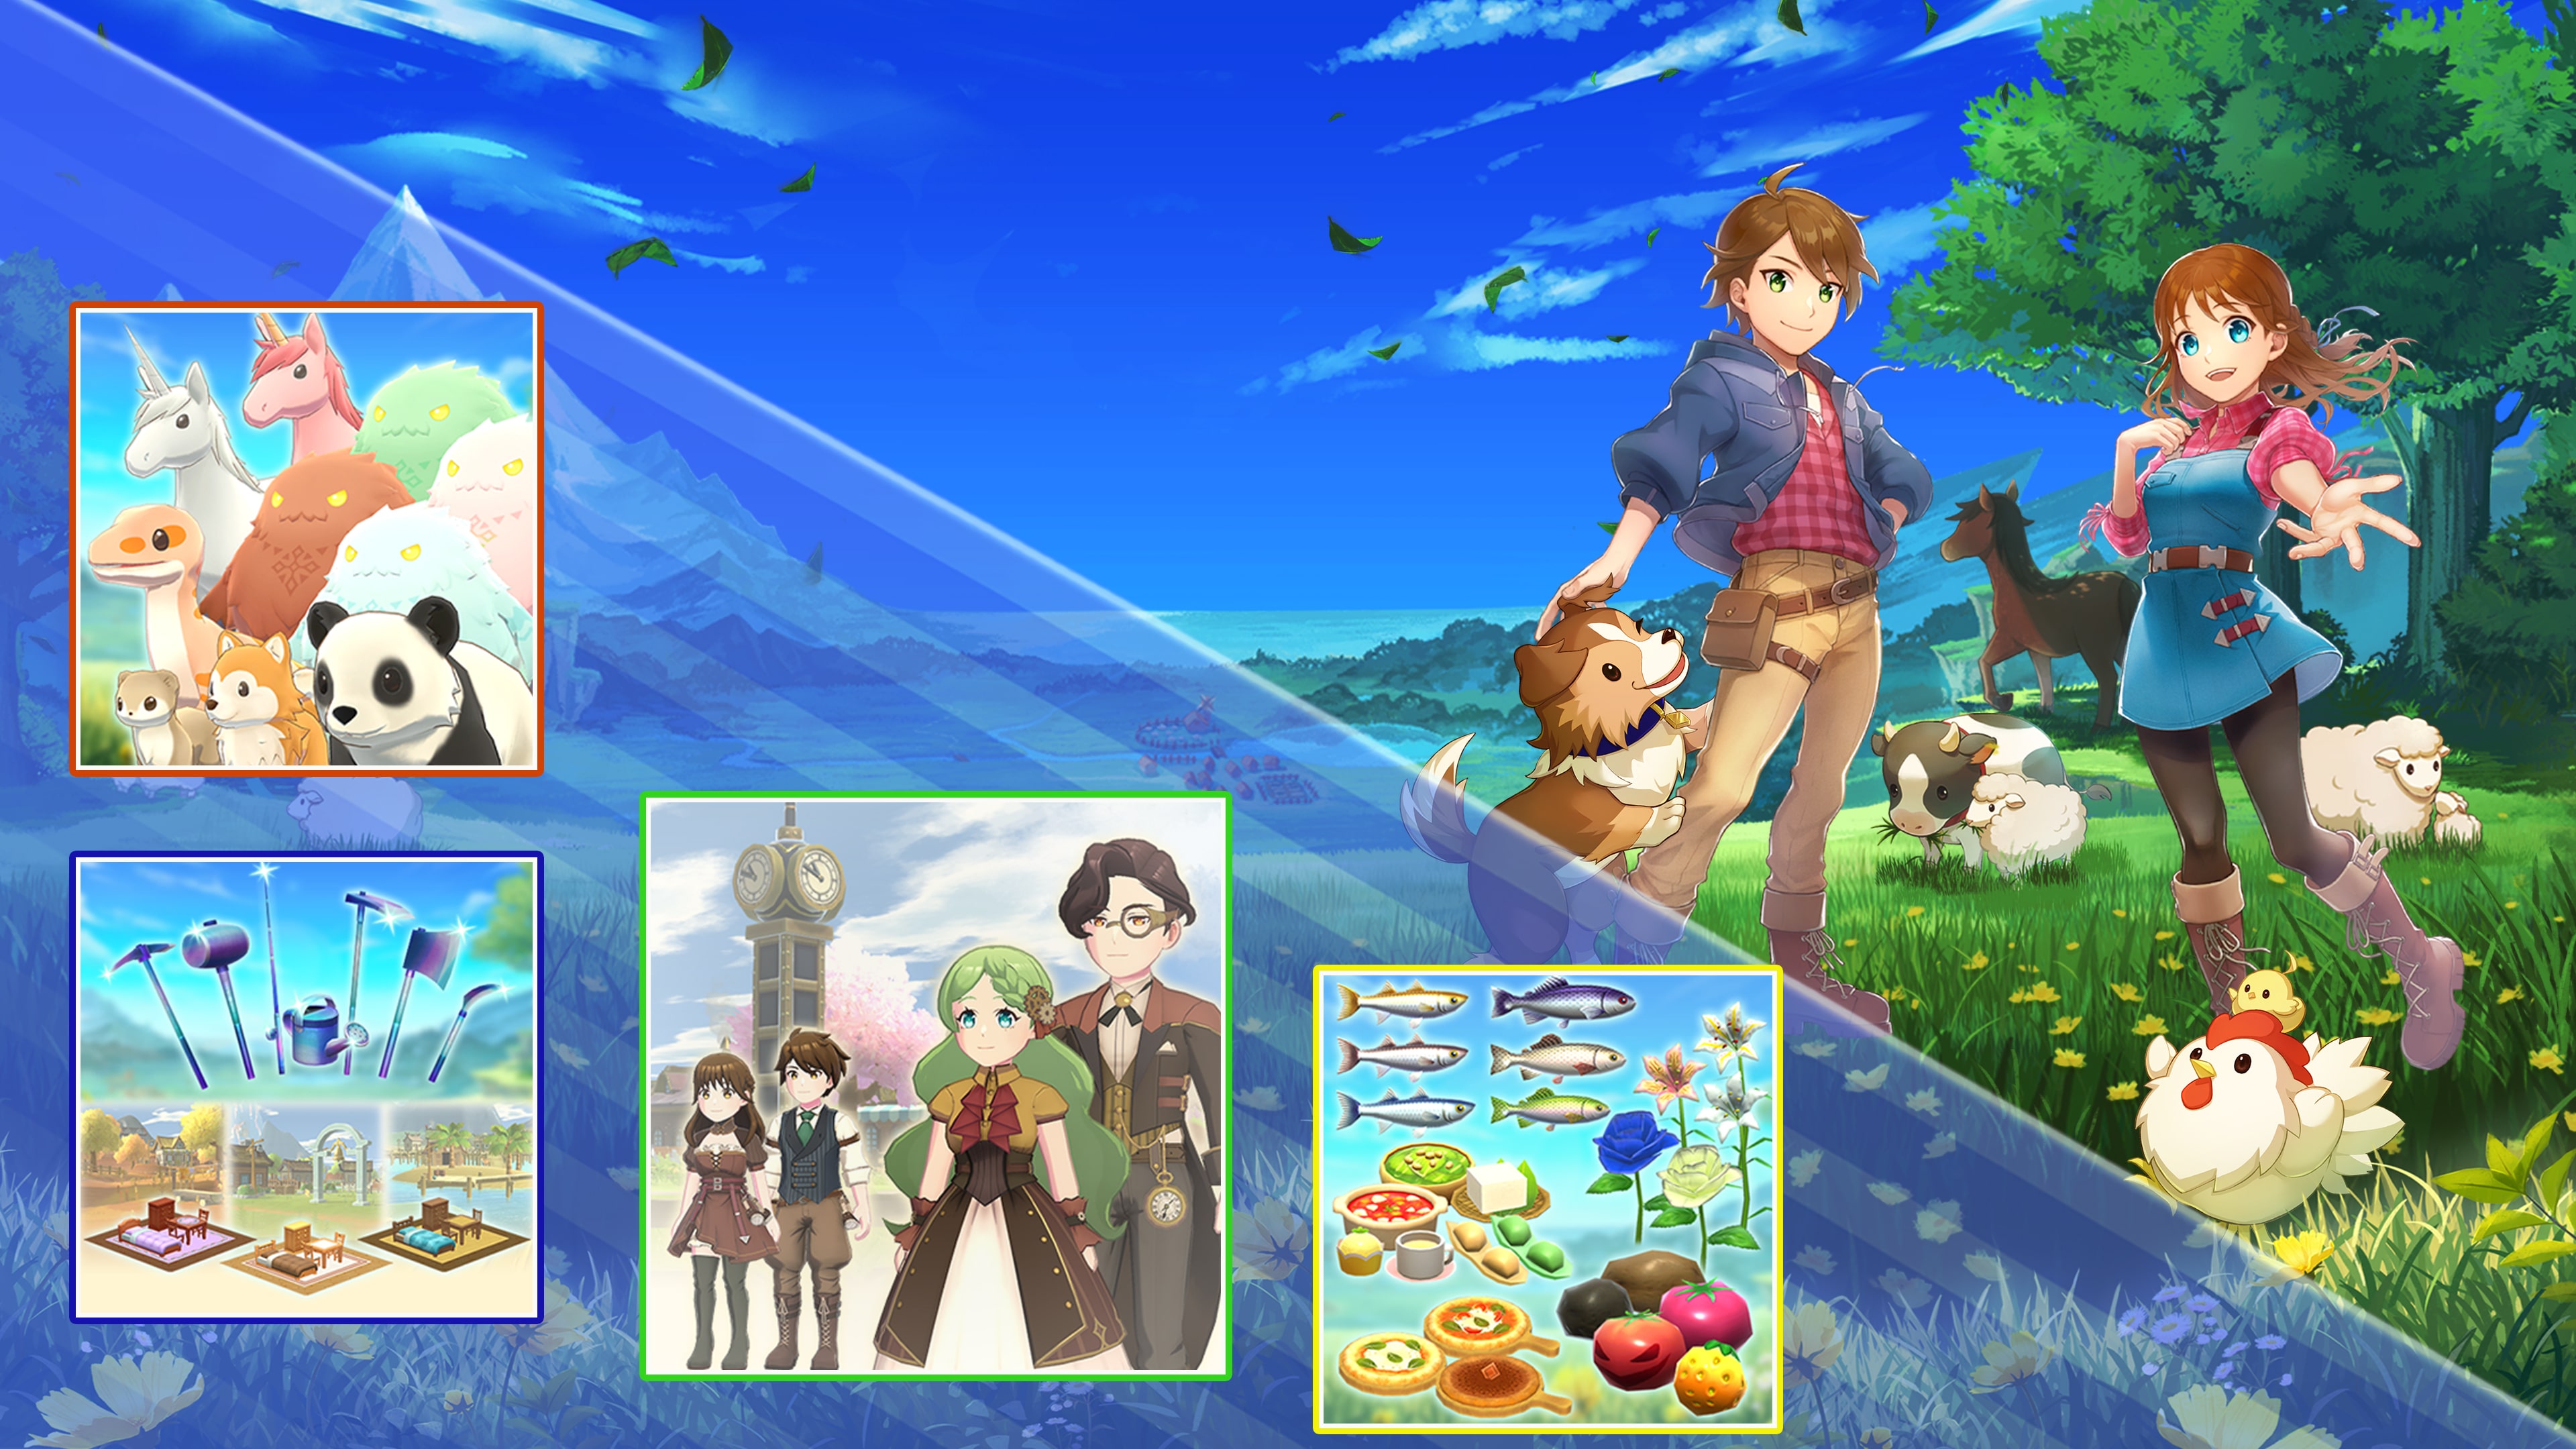 Harvest Moon: The Winds of Anthos Bundle (Simplified Chinese, English, Traditional Chinese)